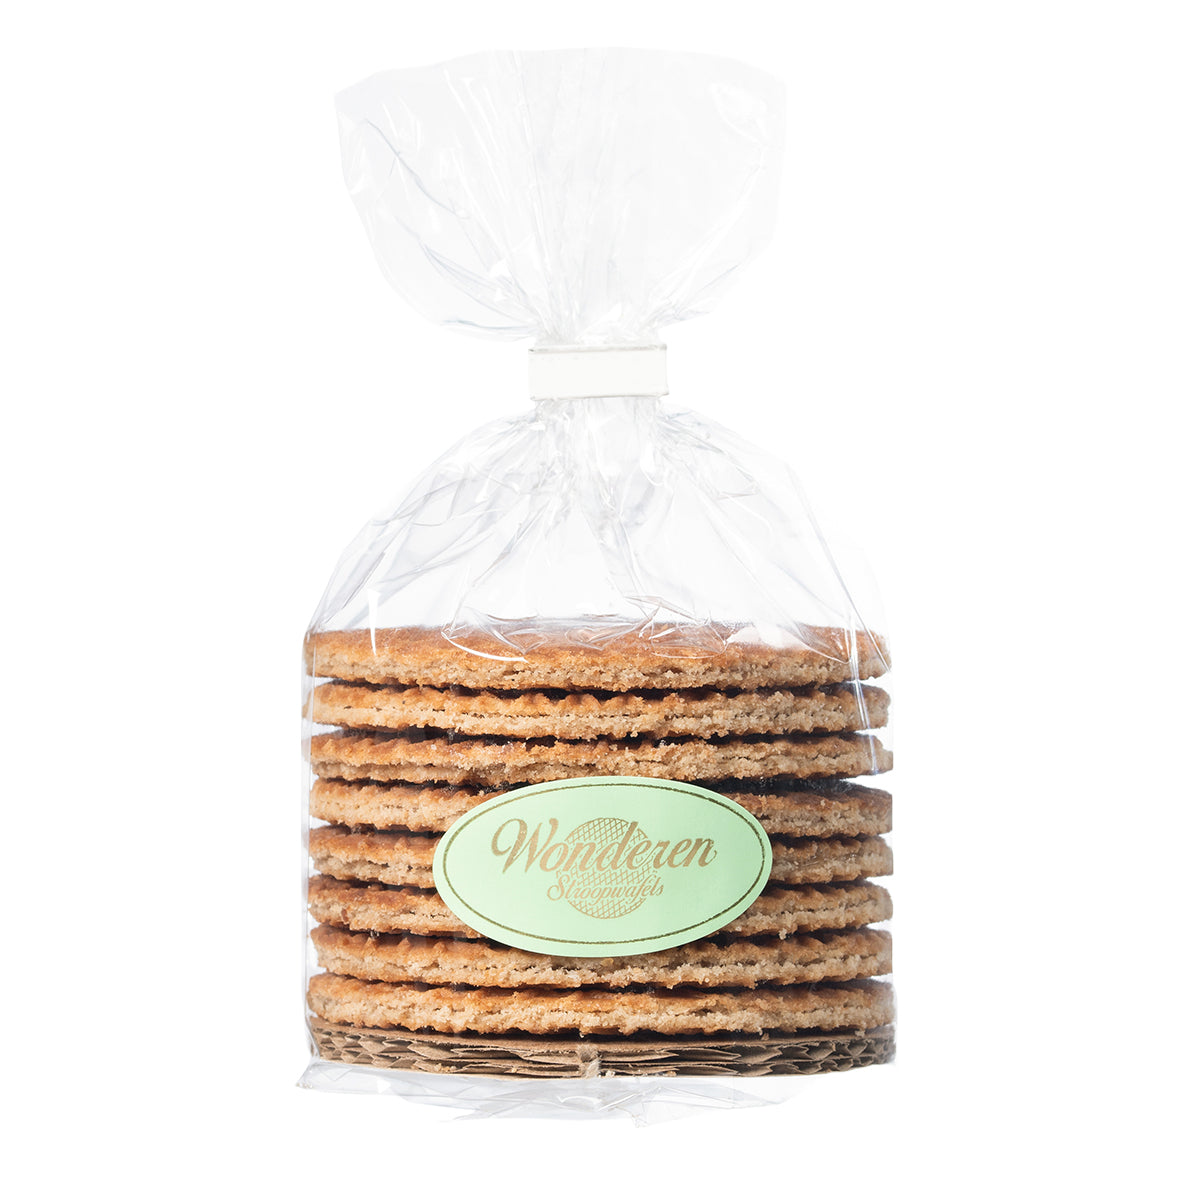 A stack of Authentic Green Stroopwafel Tin Can with Refill from Wonderen Stroopwafels in a plastic bag on a white background.